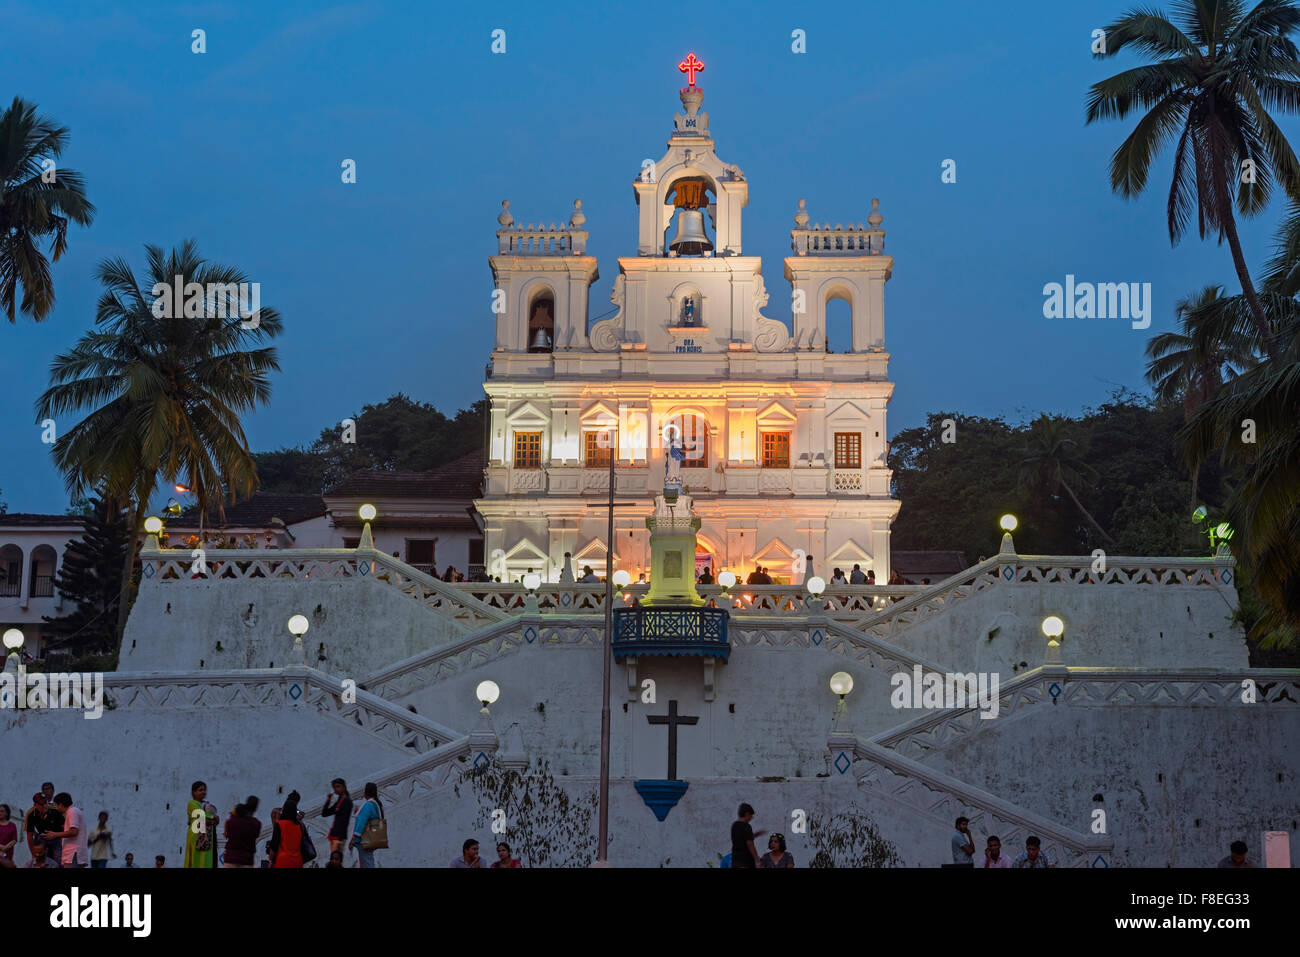 Church of Our Lady of the Immaculate Conception Panjim Goa India Stock Photo